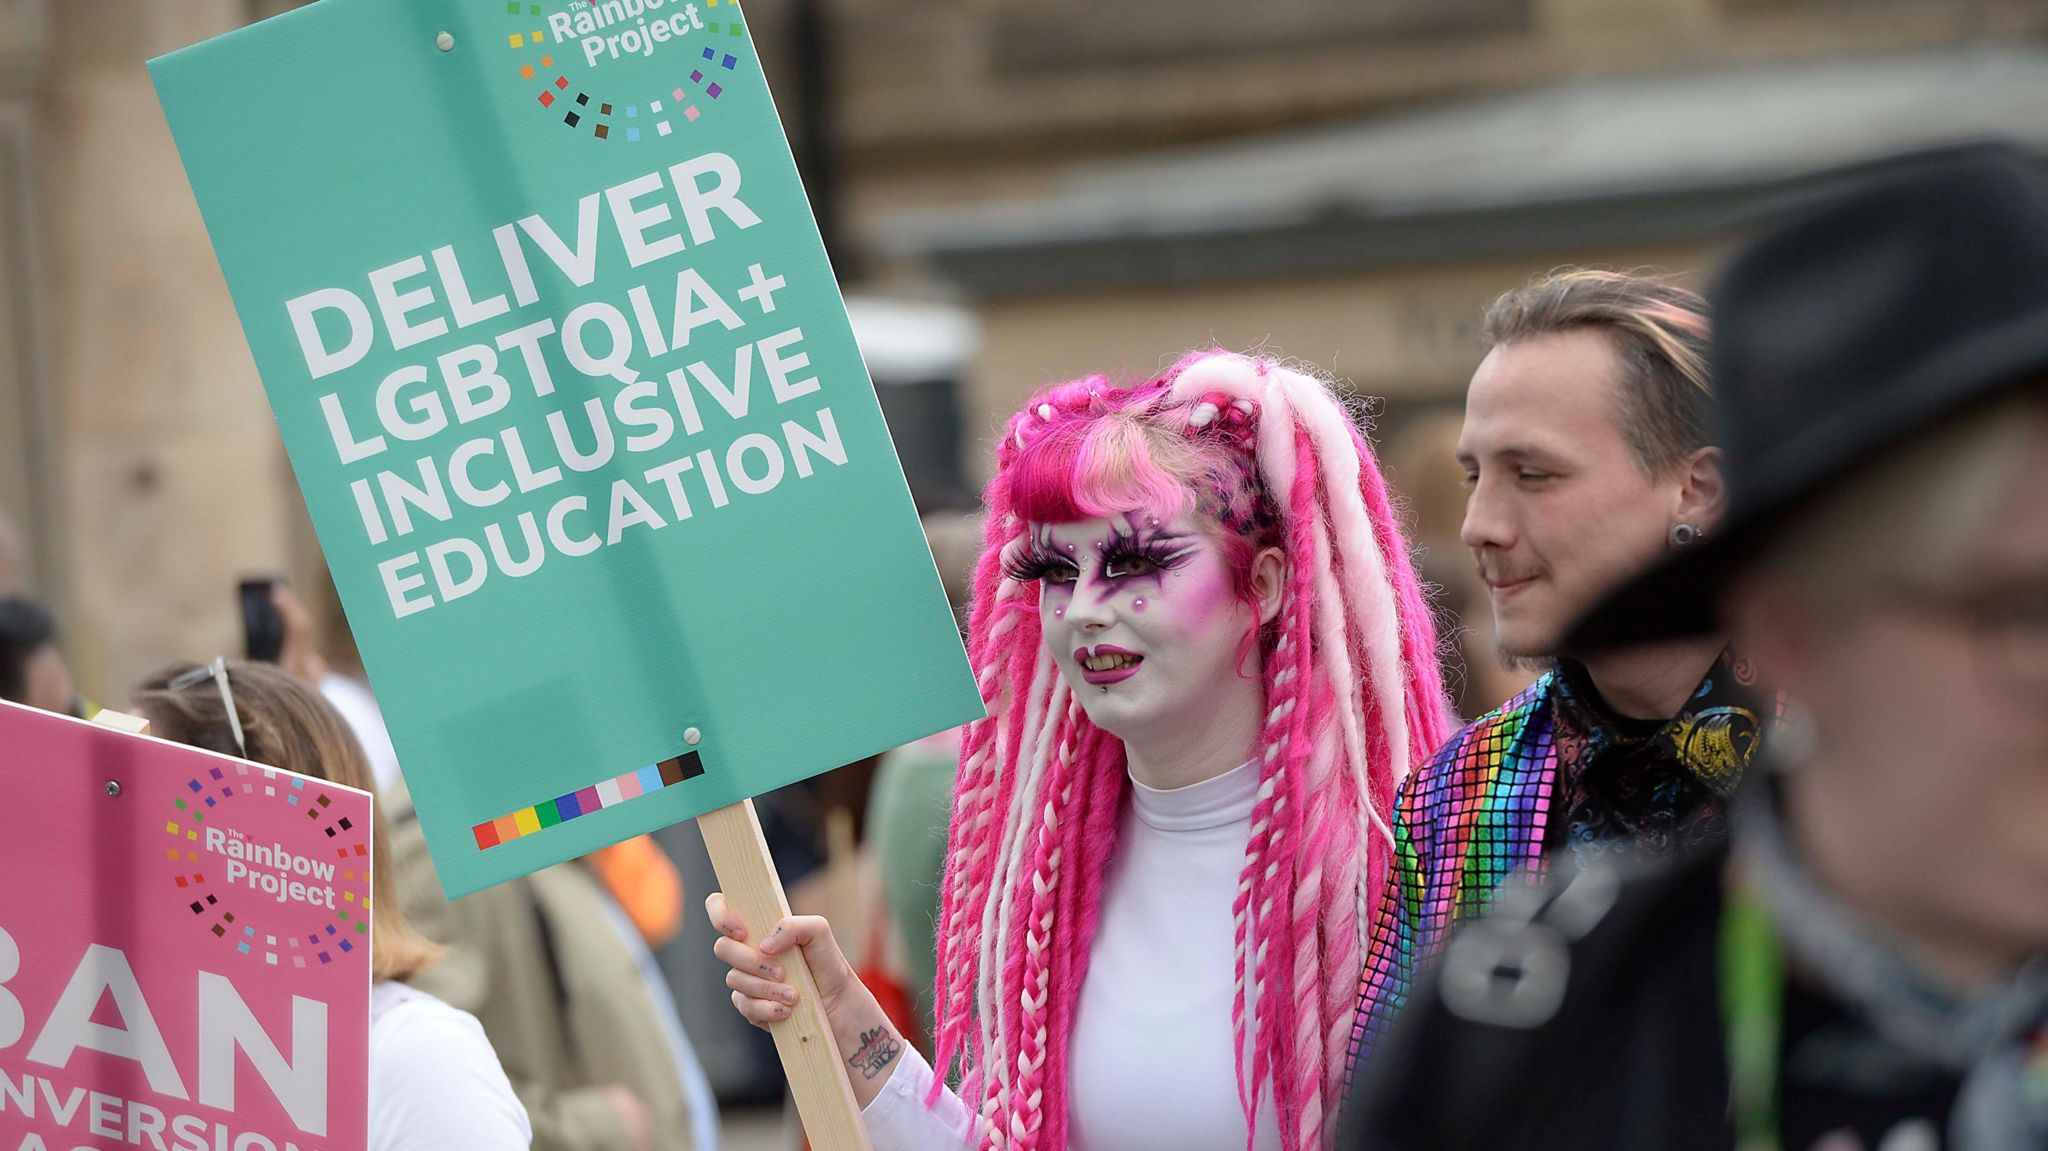 Person carrying a sign that reads "Deliver LGBTQIA+ Inclusive Education"